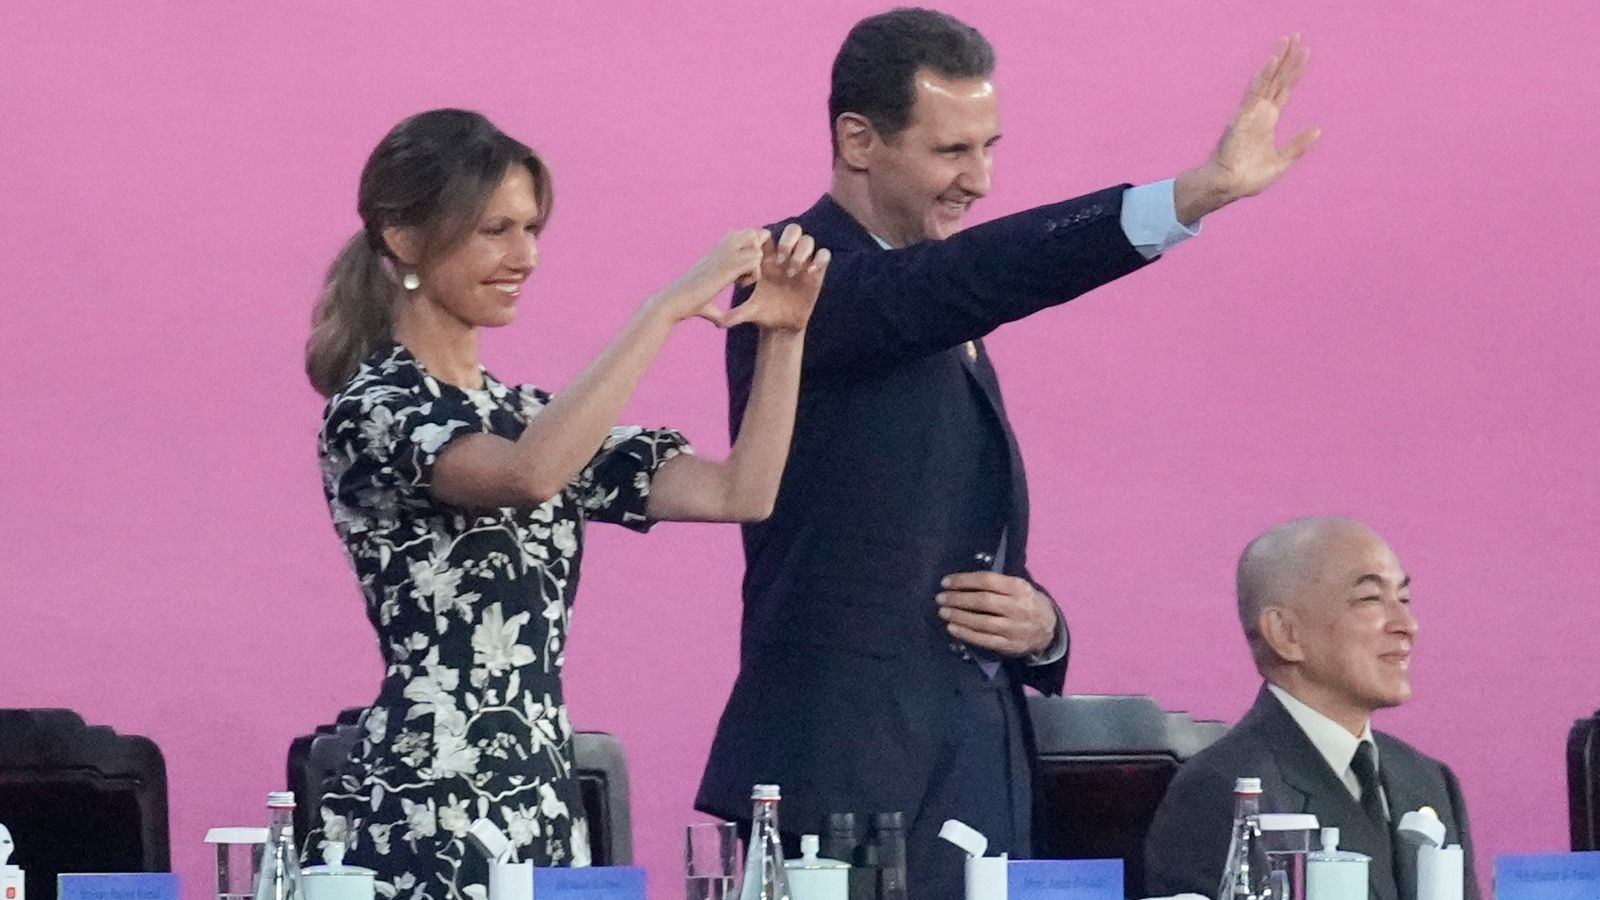 Syria's Bashar al Assad and wife laugh and wave at Asian Games opening ceremony amid China talks